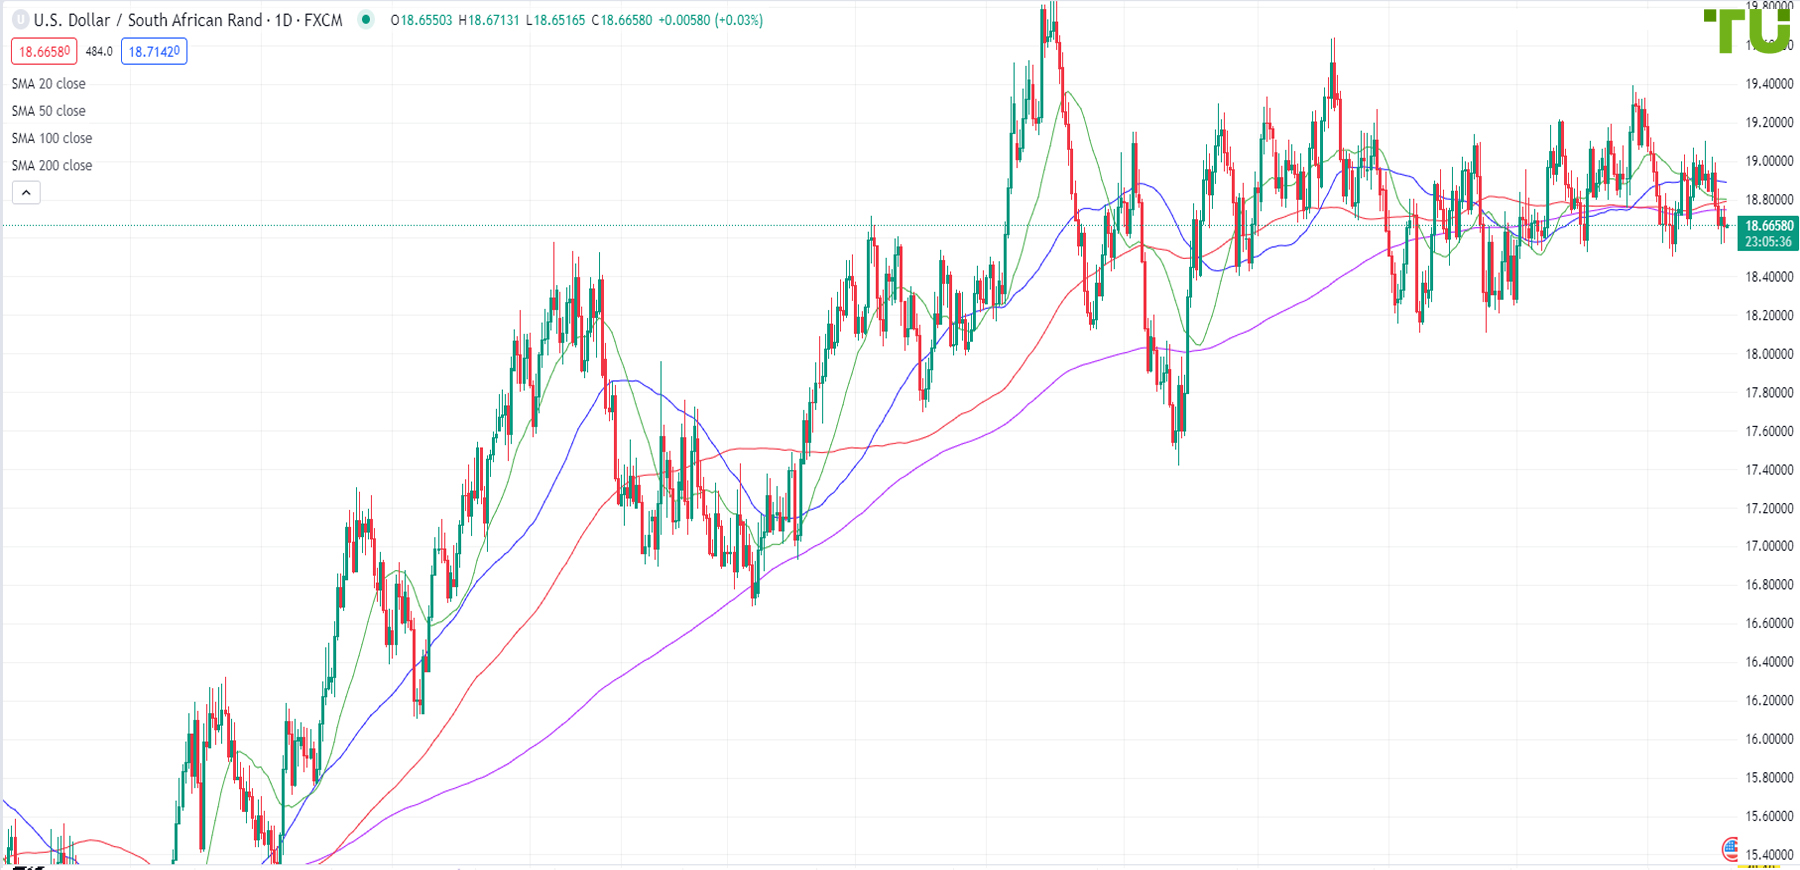 USD/ZAR sold off on the upside